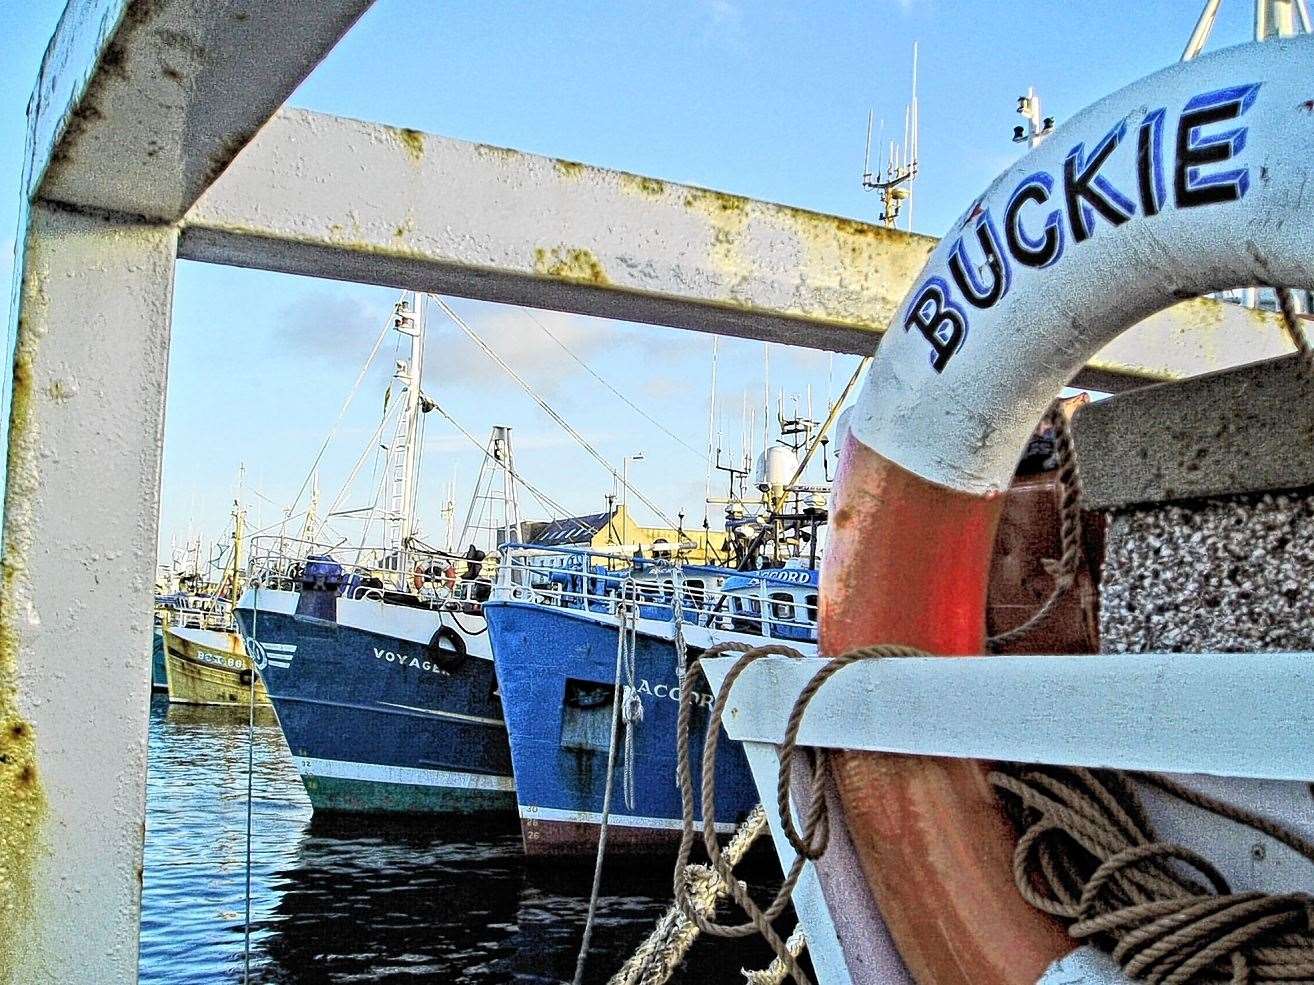 A total of 25 boats landed at Buckie Harbour during the week.